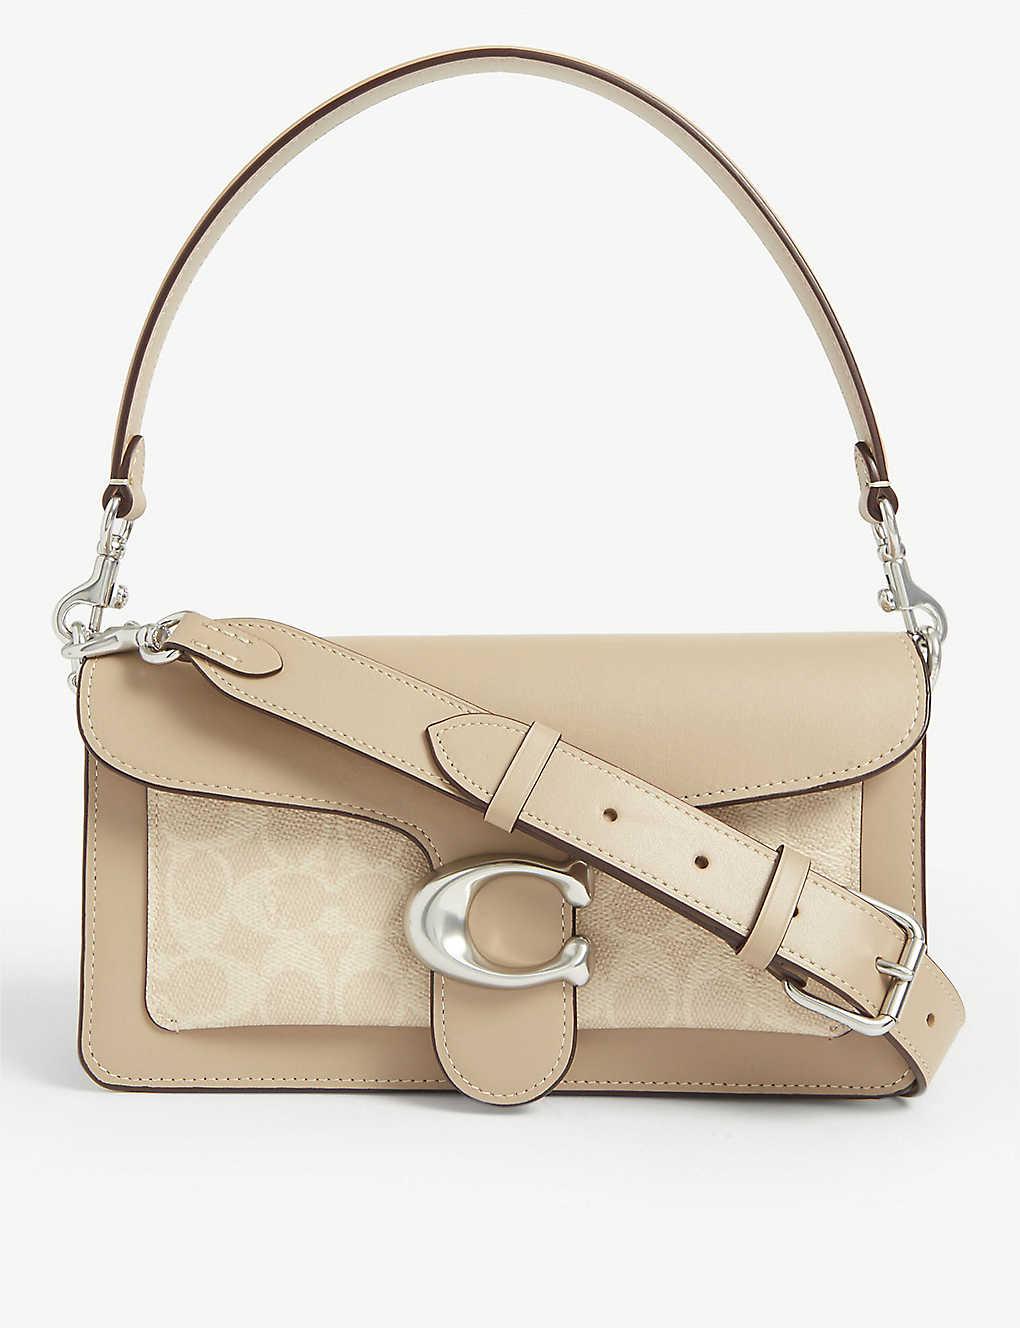 COACH Tabby 26 Small Shoulder Bag in Natural | Lyst